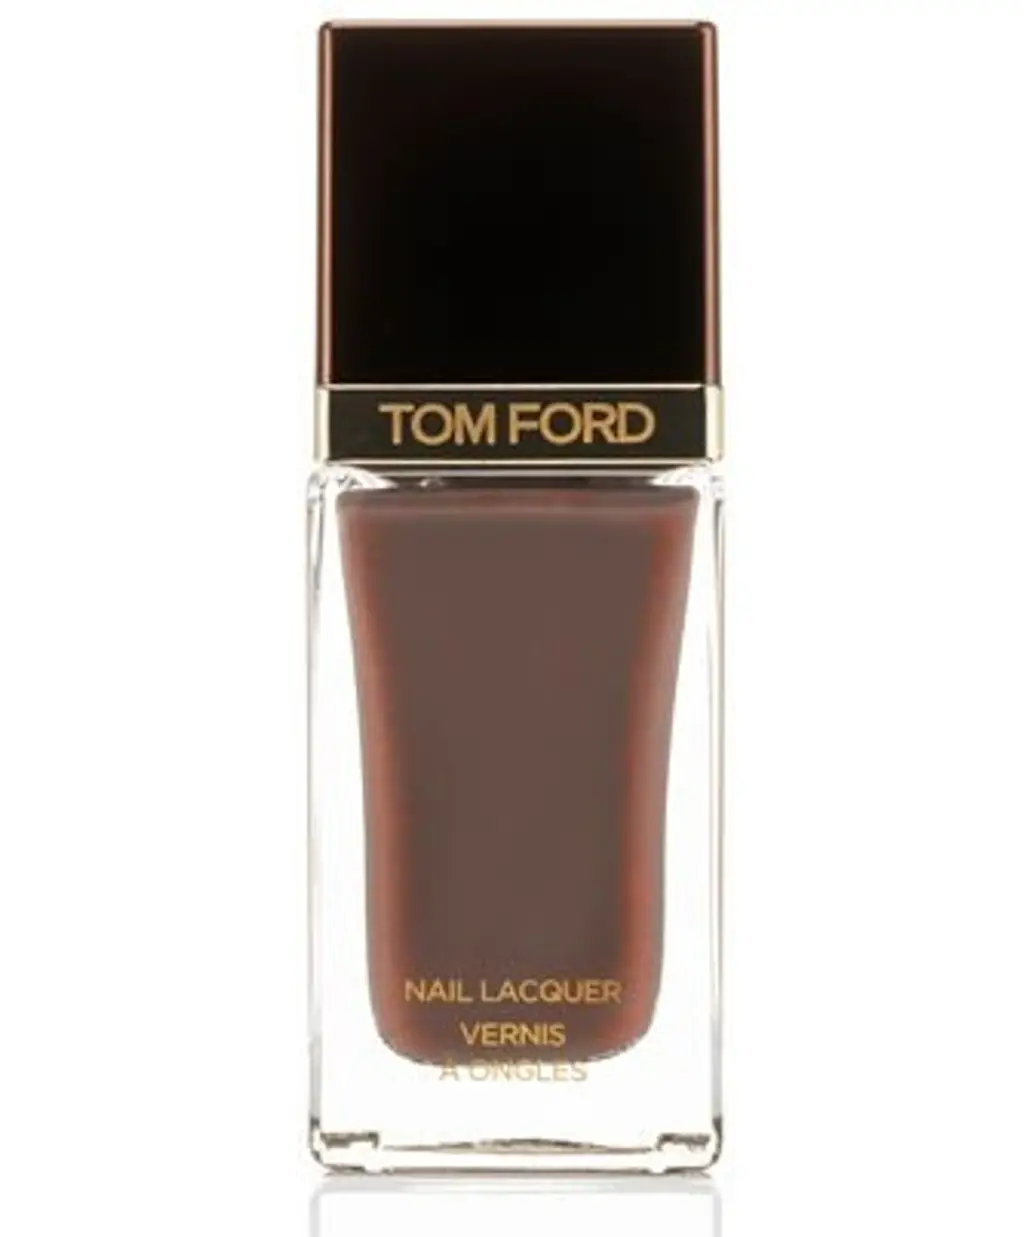 Tom Ford Beauty Nail Lacquer in Black Sugar